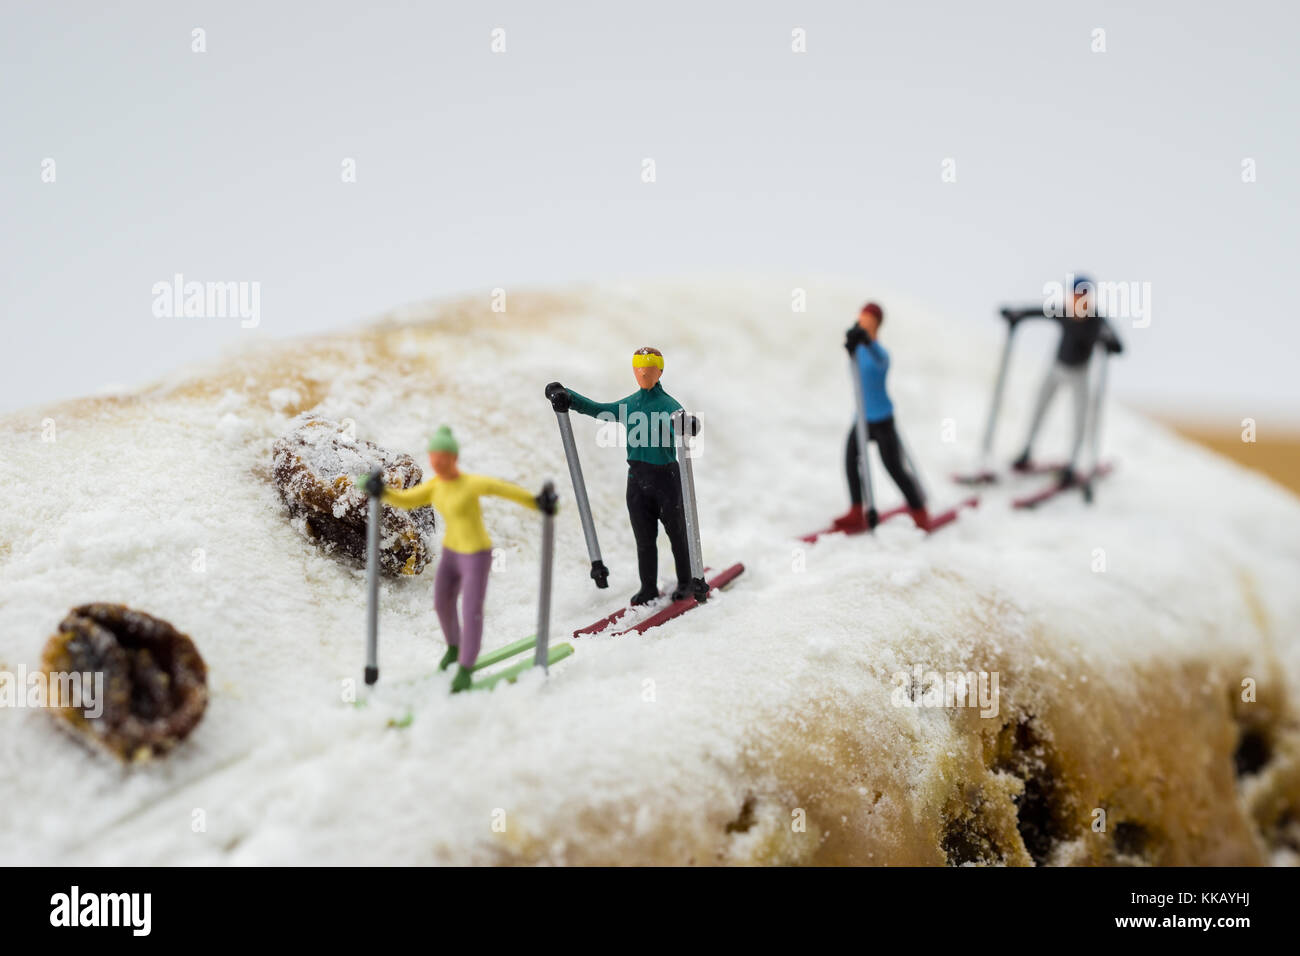 Miniature figure of a man skiing on winter snow on colorful red skis  surrounded by multiple shadows and copyspace Stock Photo - Alamy